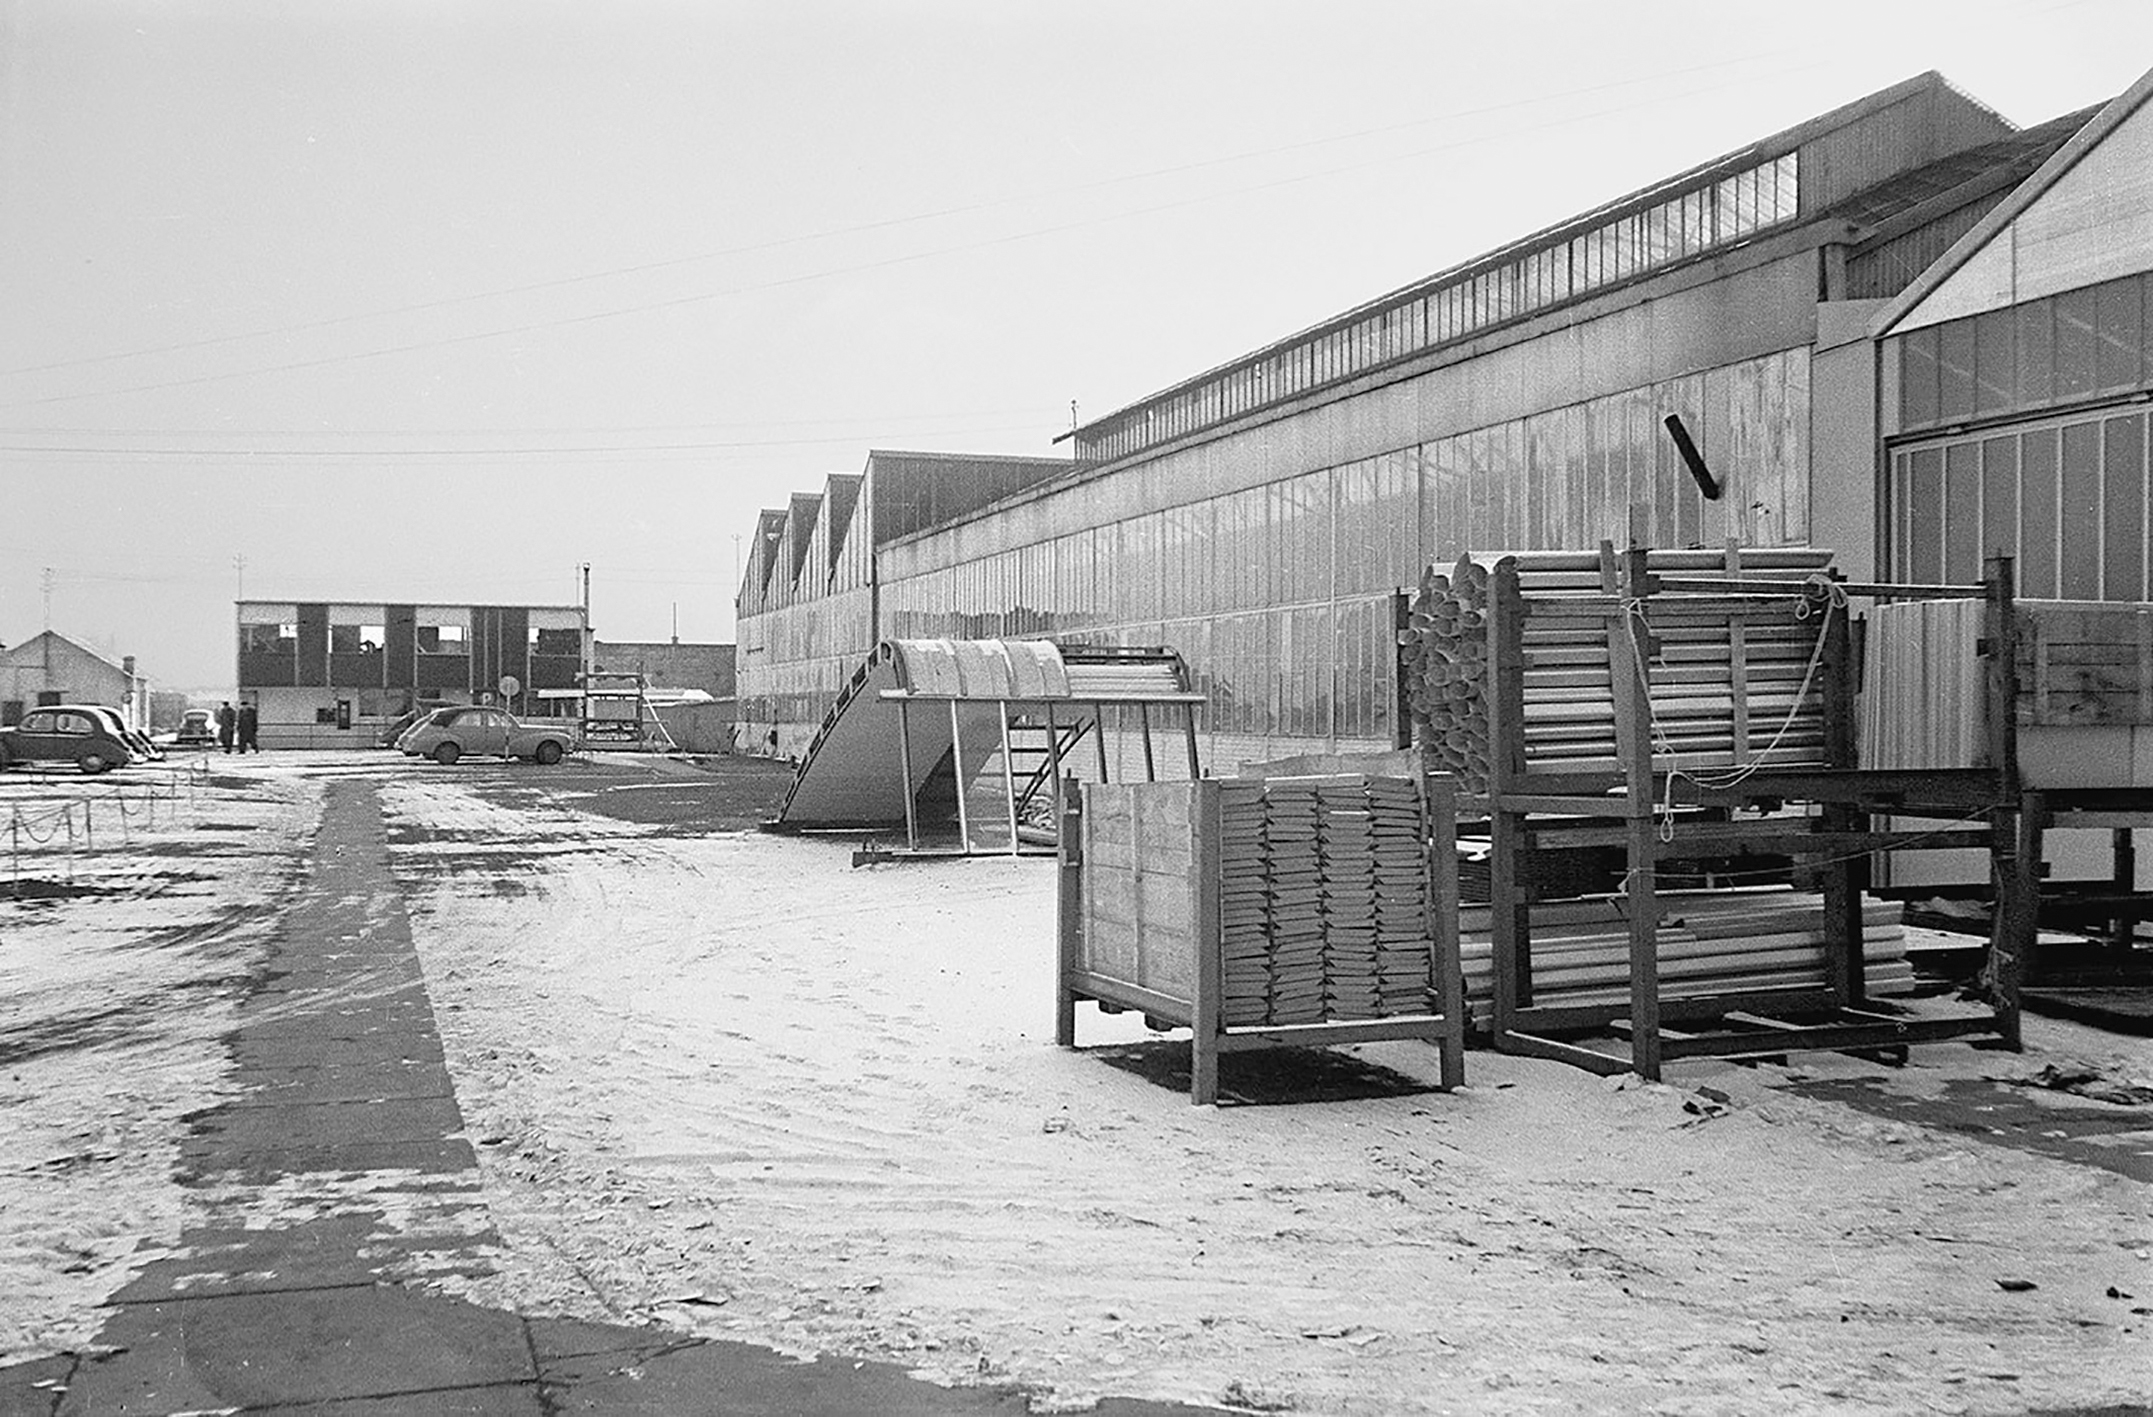 Ateliers Jean Prouvé, Maxéville. In the background, the design office, c. 1952.